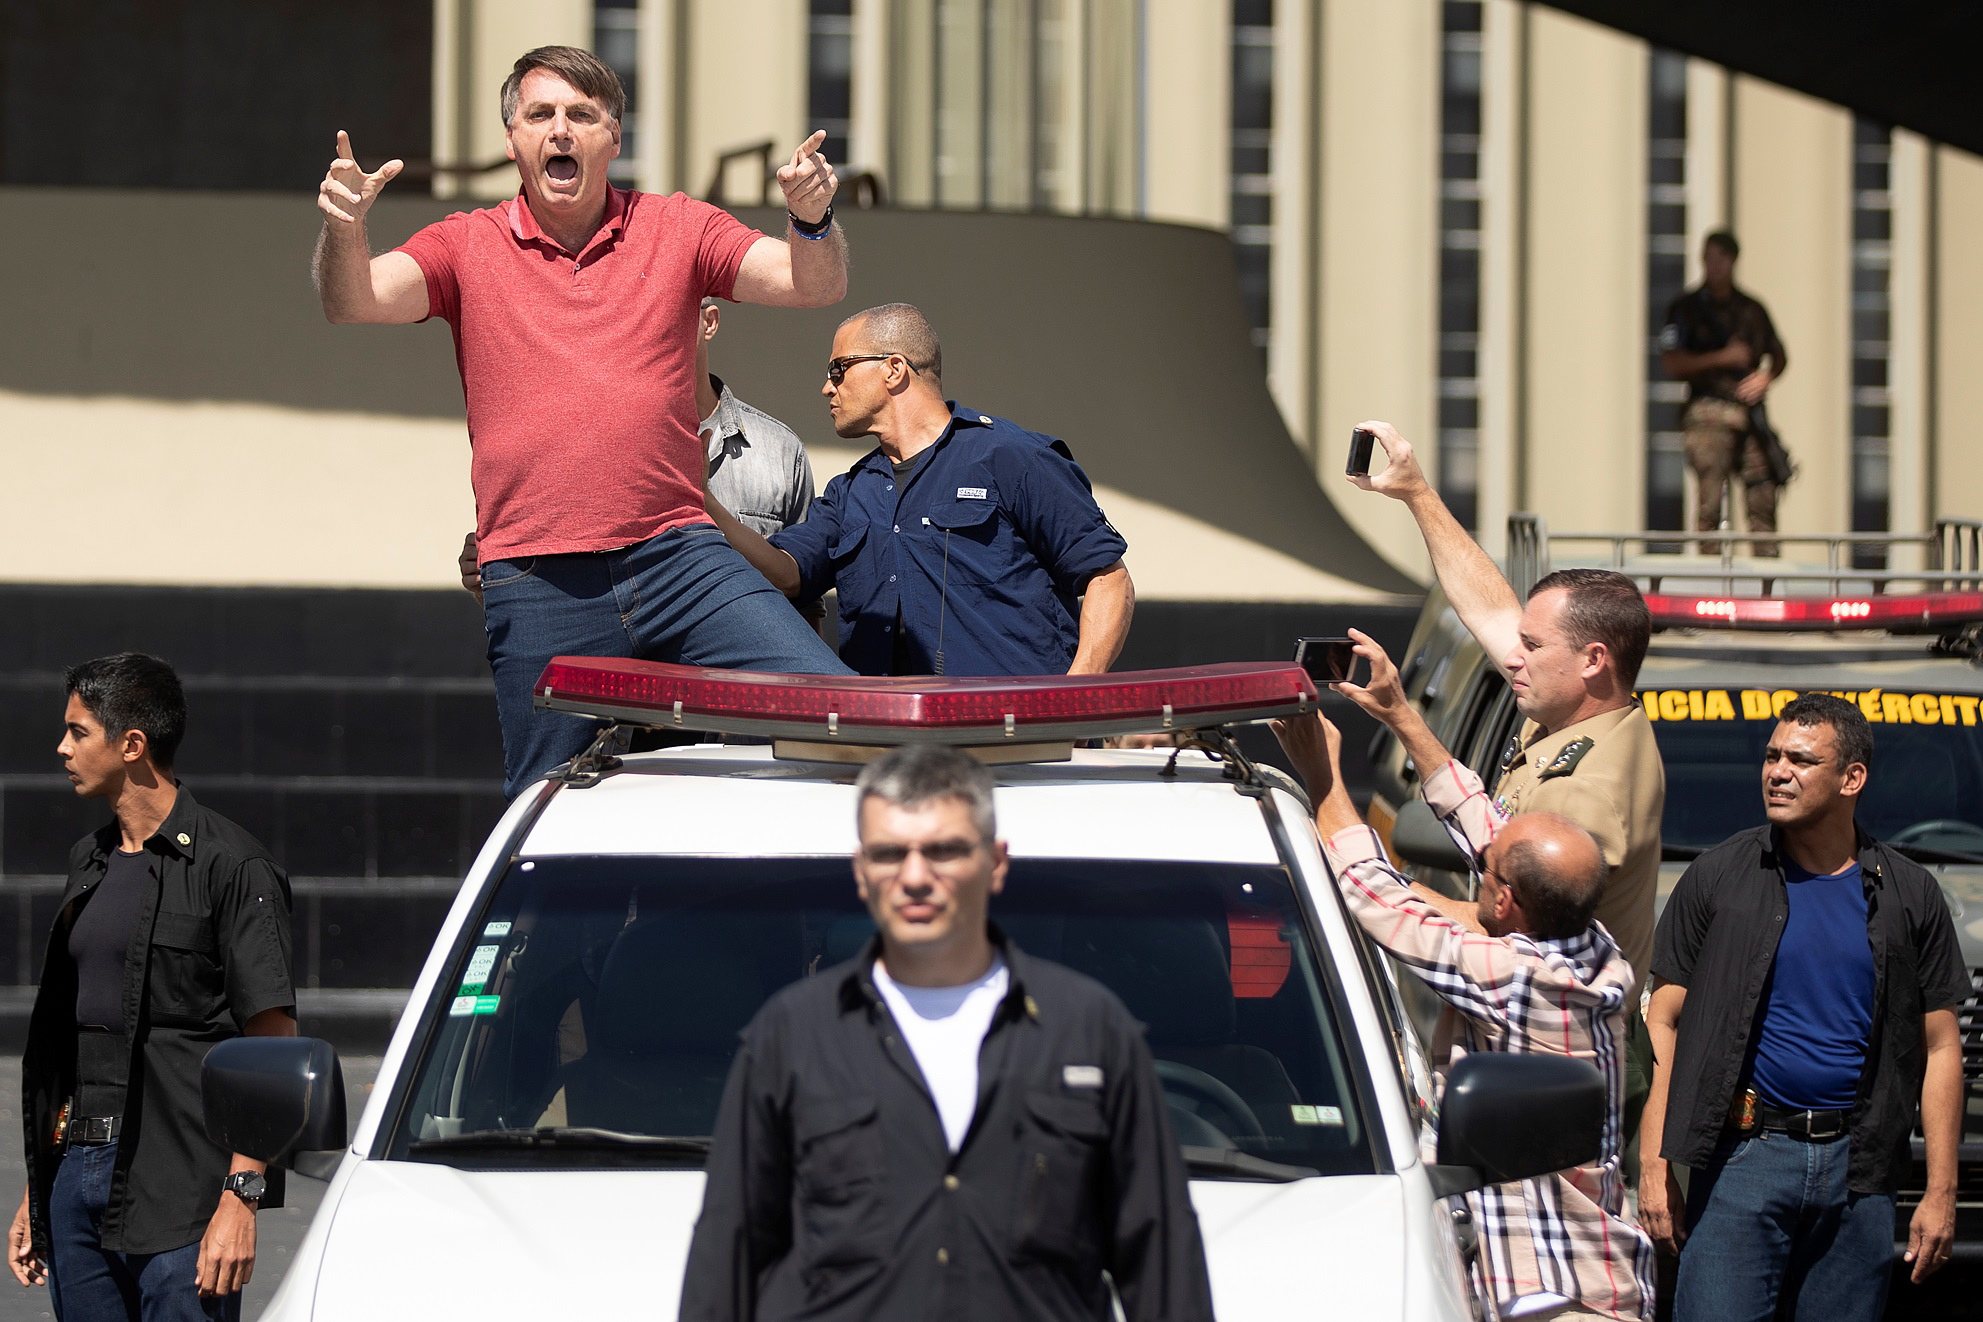 epa08372104 Brazilian President Jair Bolsonaro waves to supporters during a rally in Brasilia, Brazil, 19 April 2020. Dozens of Brazilian gathered to show their support to Bolsonaro despite the coronavirus situation which, to date, reported 36,599 cases positives of COVID-19 in the country.  EPA/Joedson Alves